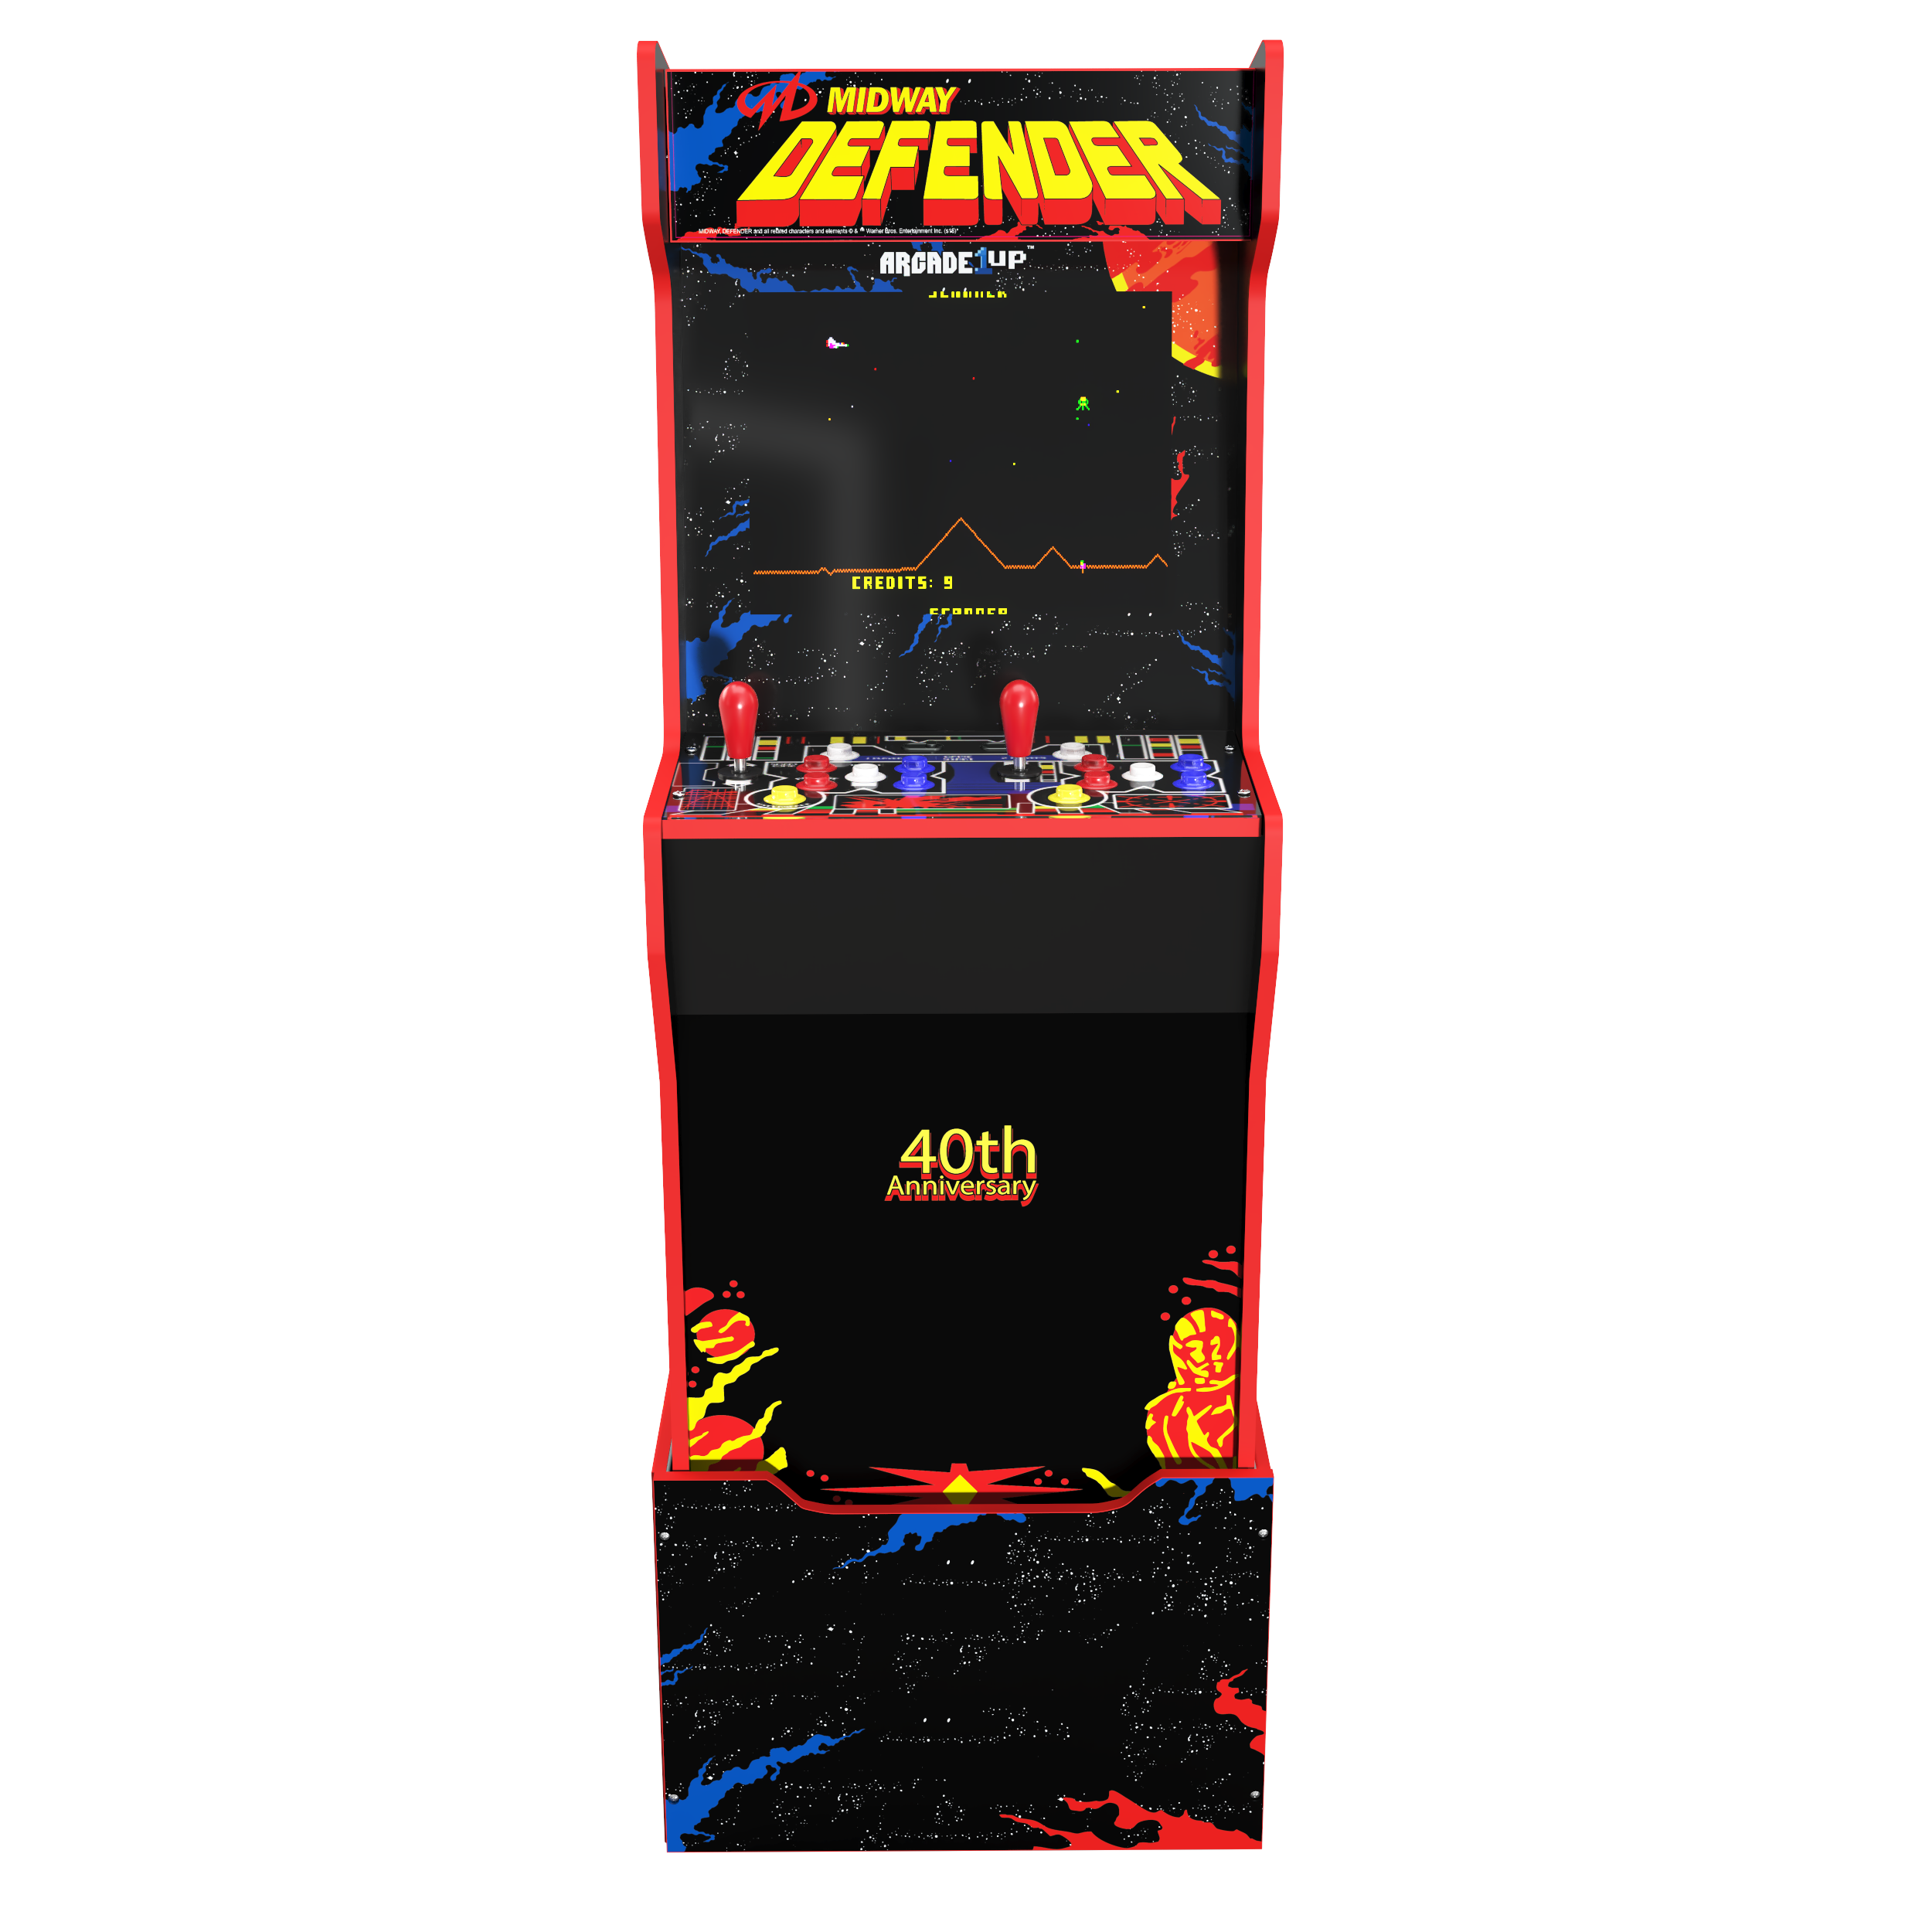 Defender 40th Anniversary 12-IN-1 Midway Legacy Edition Arcade with Licensed Riser and Light-Up Marquee, Arcade1Up - image 3 of 6